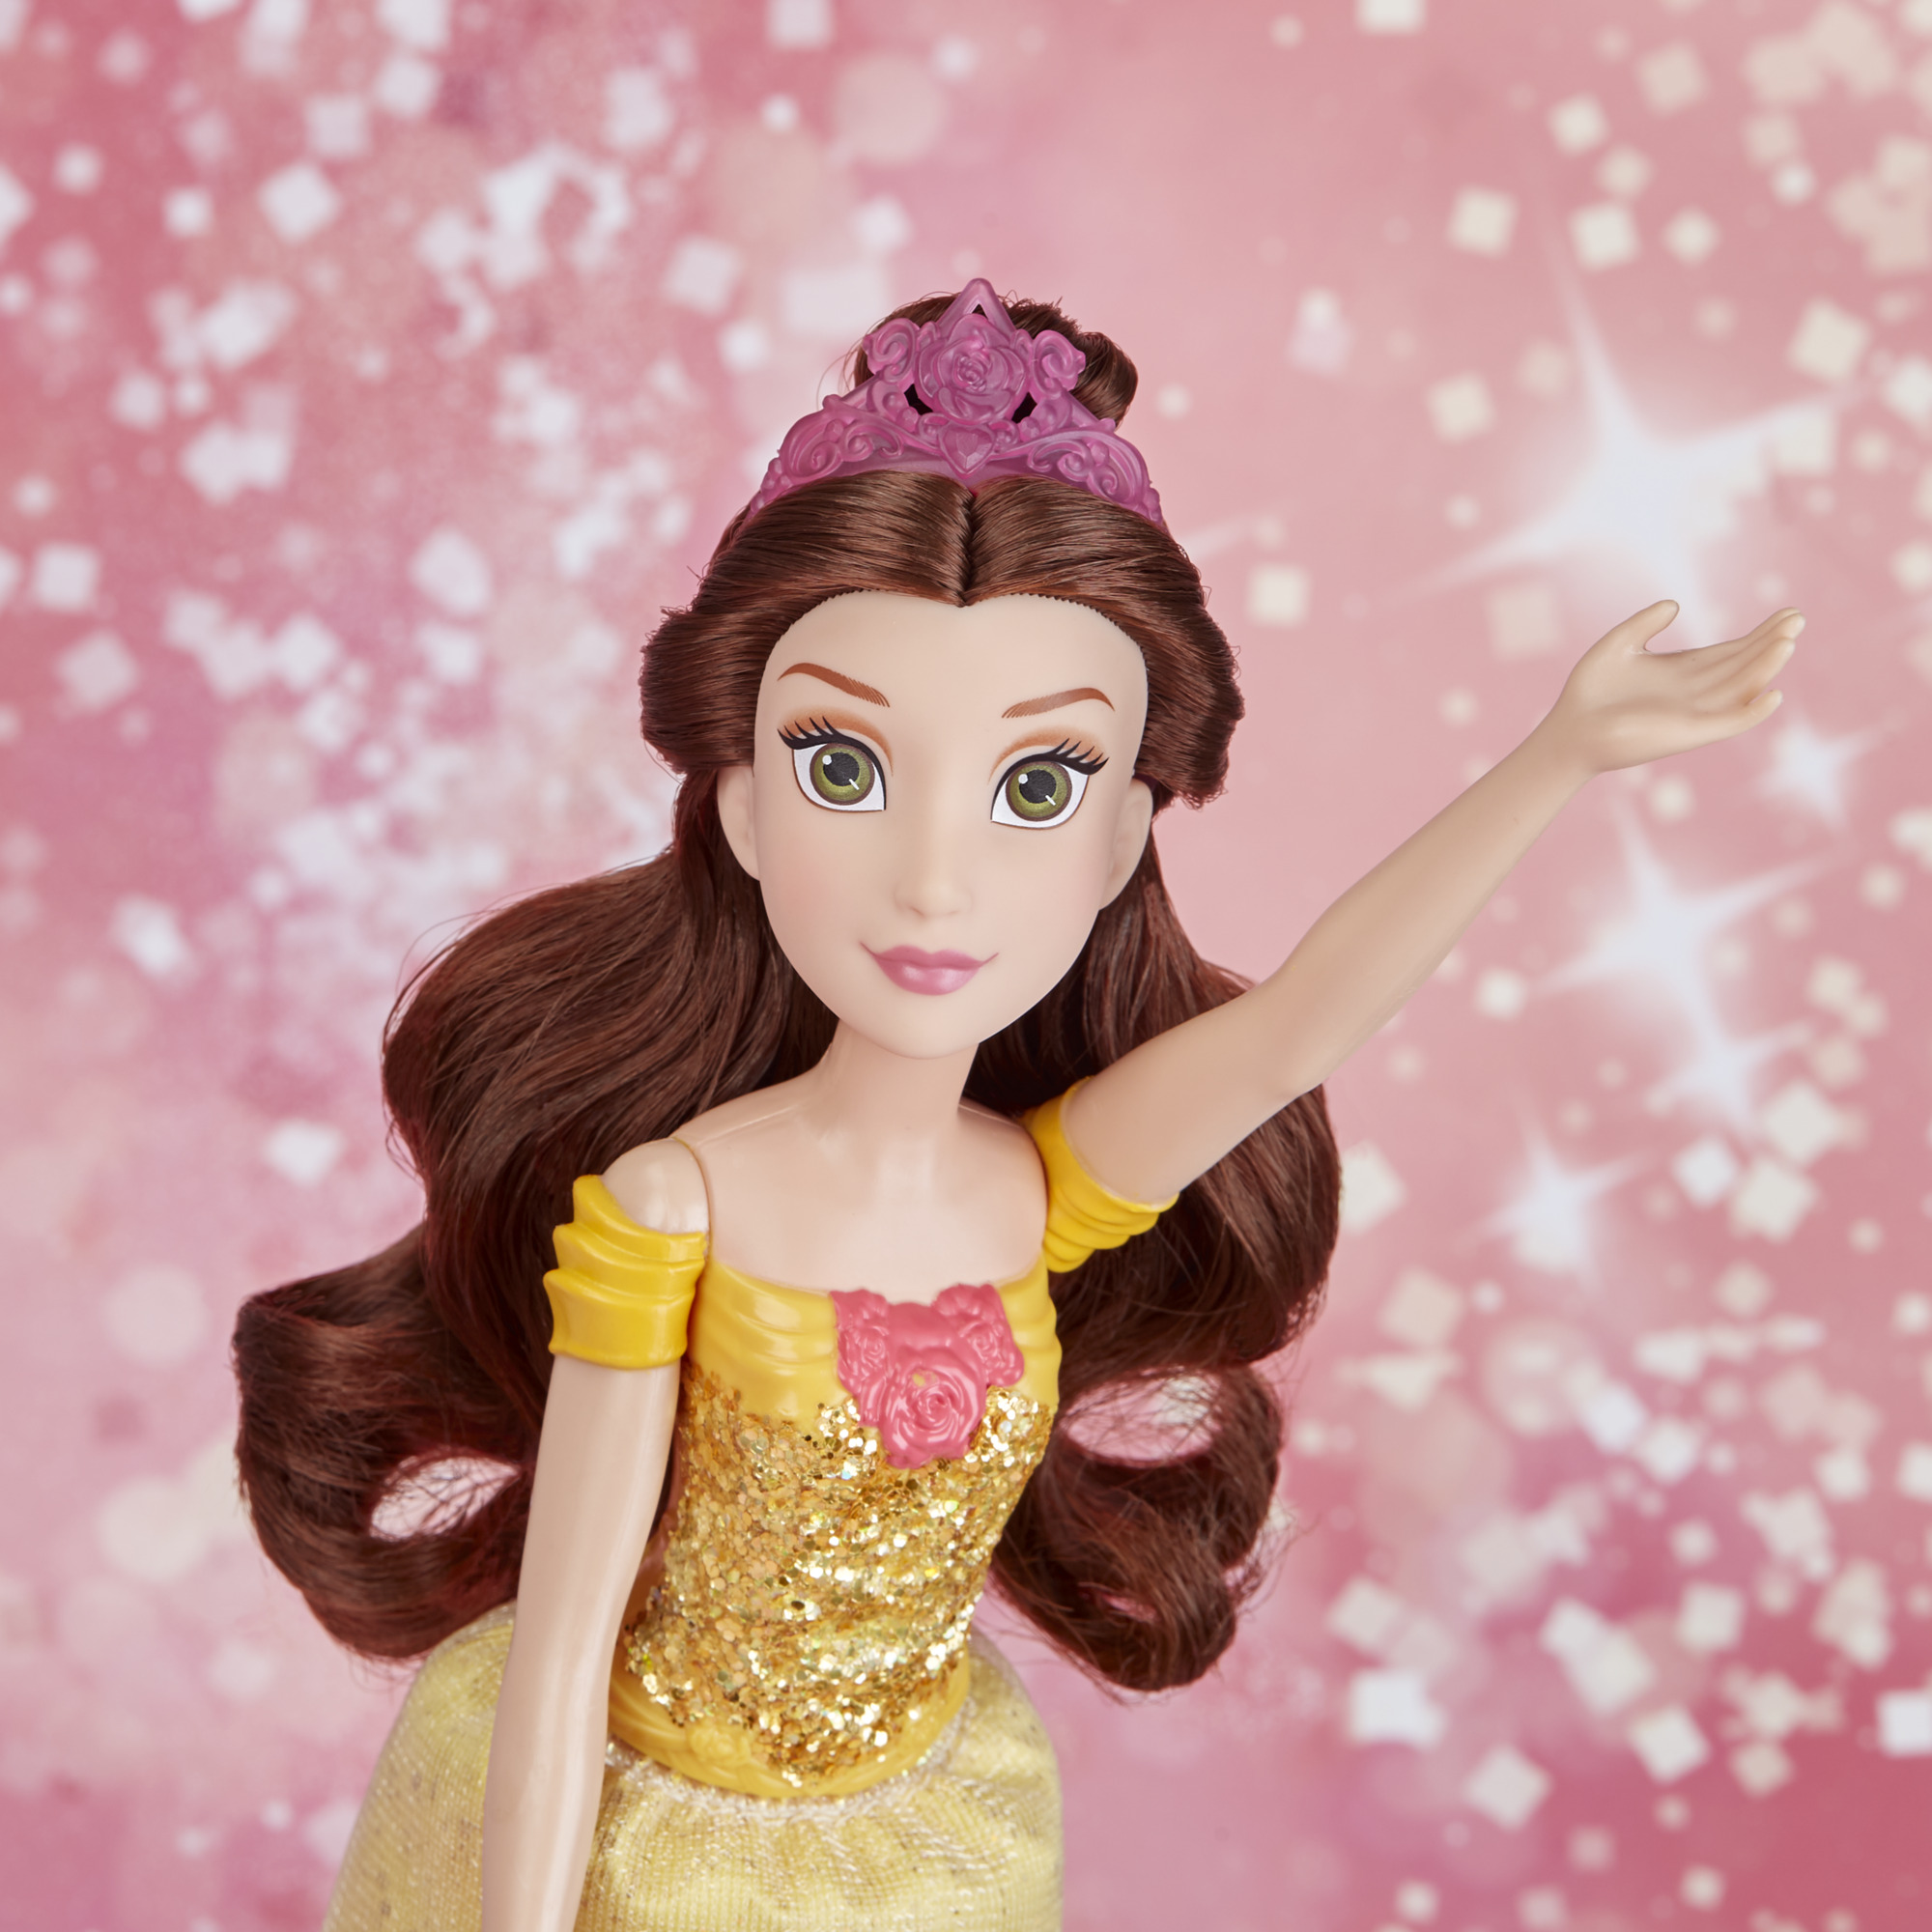 Disney Princess Royal Shimmer Belle with Sparkly Skirt, Includes Tiara and Shoes - image 15 of 16